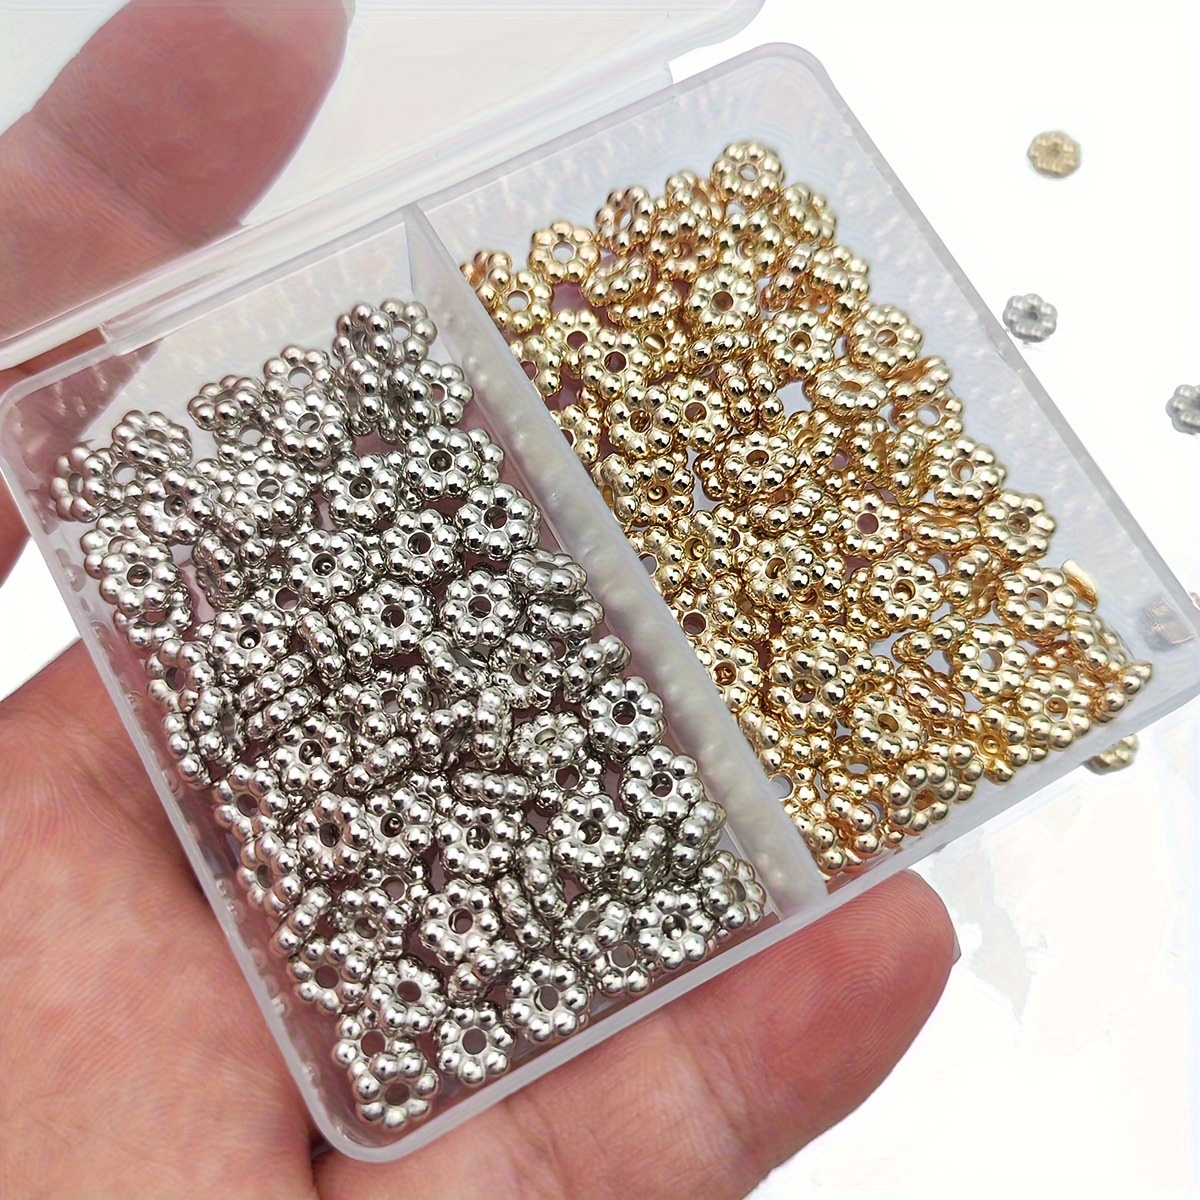  600Pcs Bracelet Making Kit Beads Rondelle Spacer Beads for  Jewelry Making, 8mm Rhinestone Spacer Beads Crystal Bead Spacers for  Bracelets, Focal Beads for Pen, 10 Colors : Arts, Crafts & Sewing